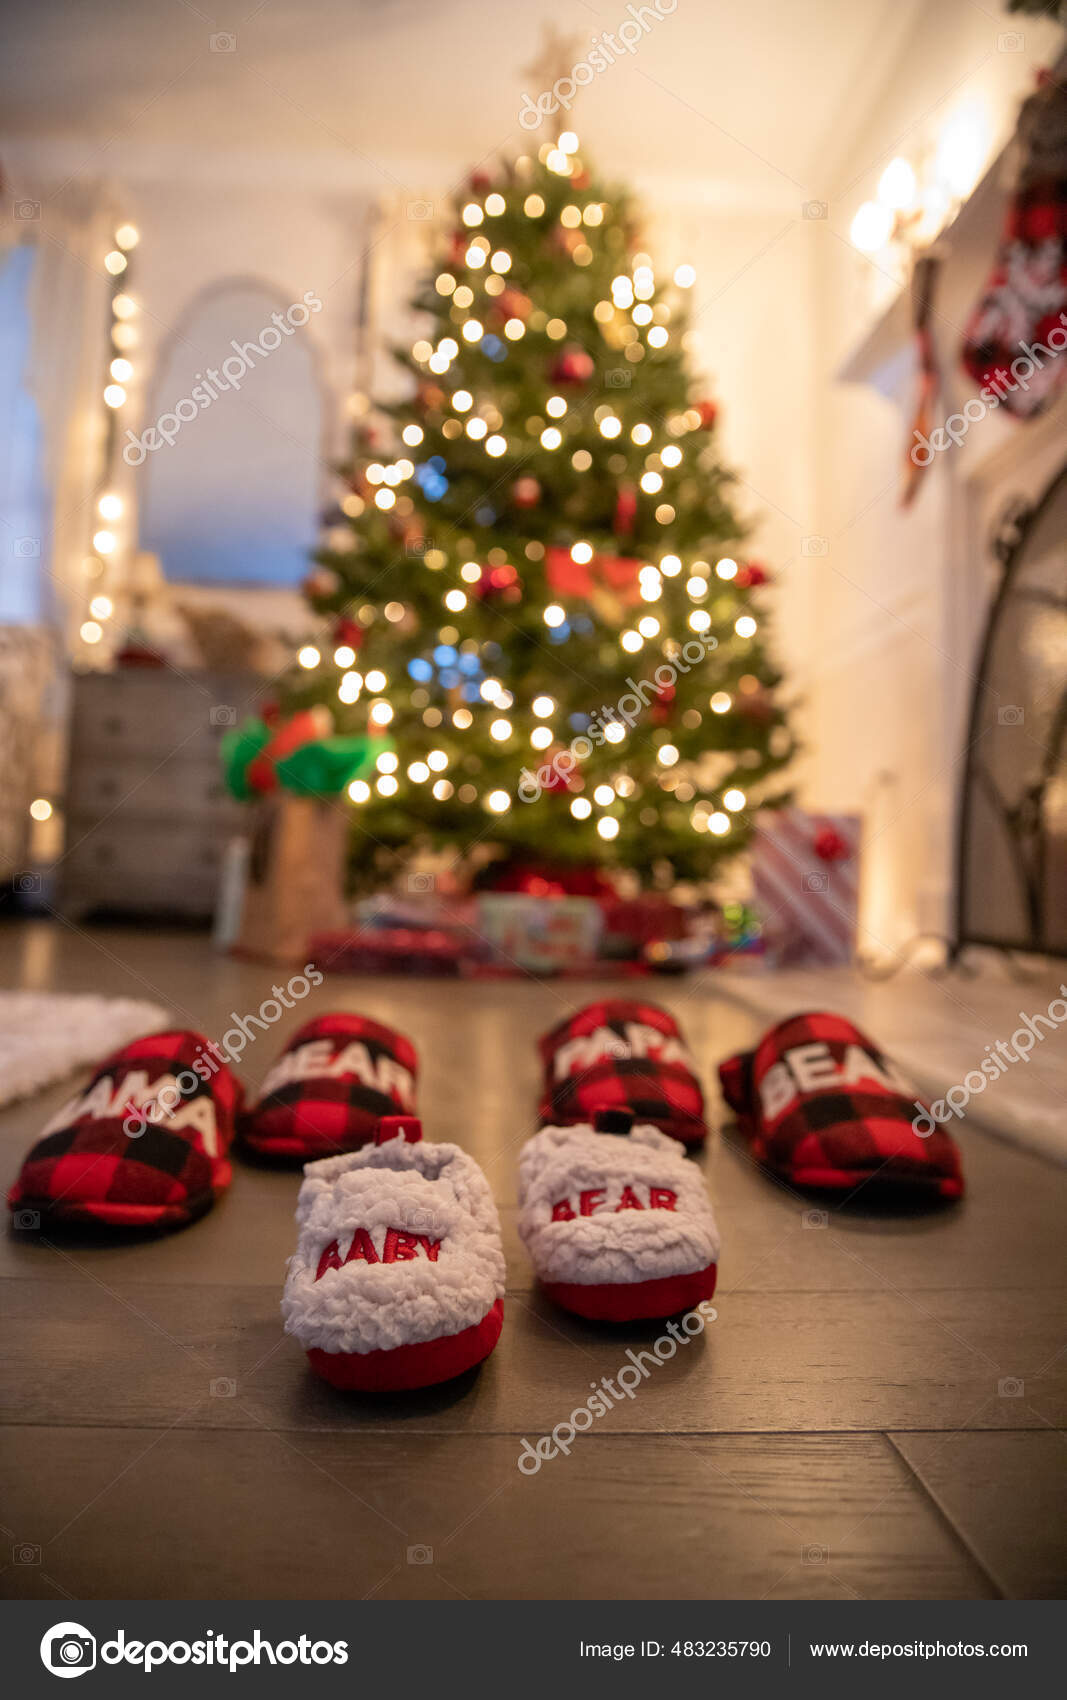 Family Slippers Front Christmas Holidays Stock Photo by ©adam.j.wilding 483235790